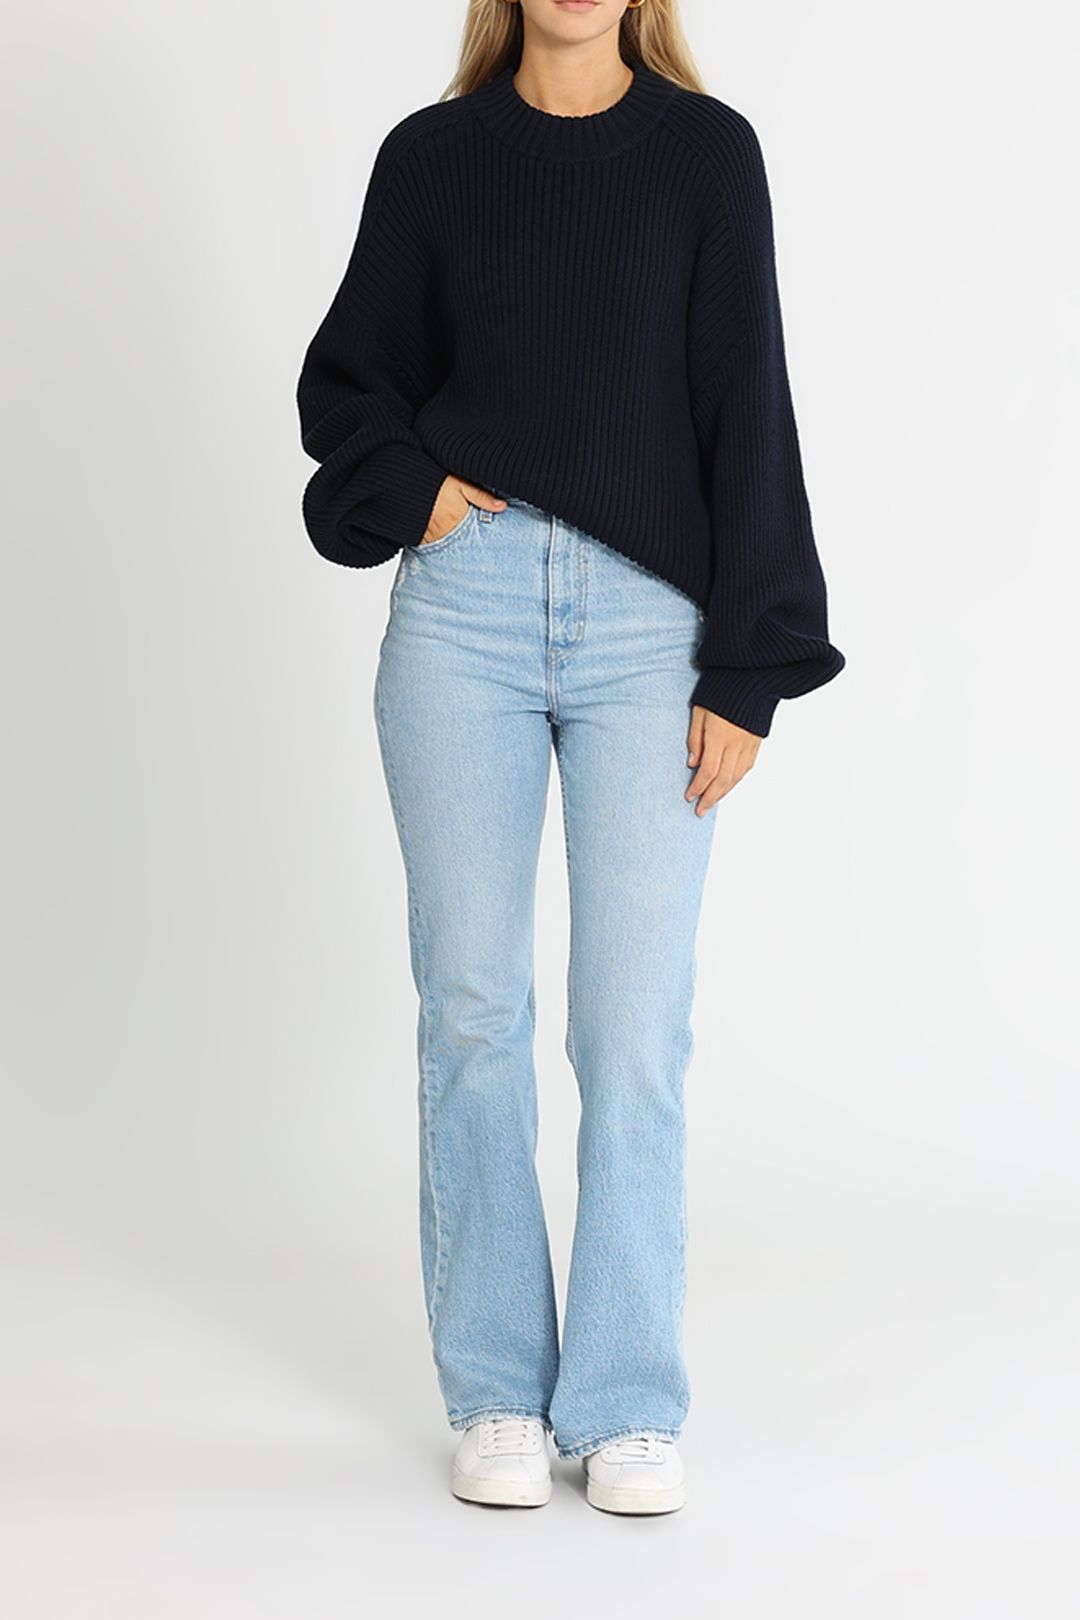 C&M Camilla And Marc Ray Knit Crew Navy